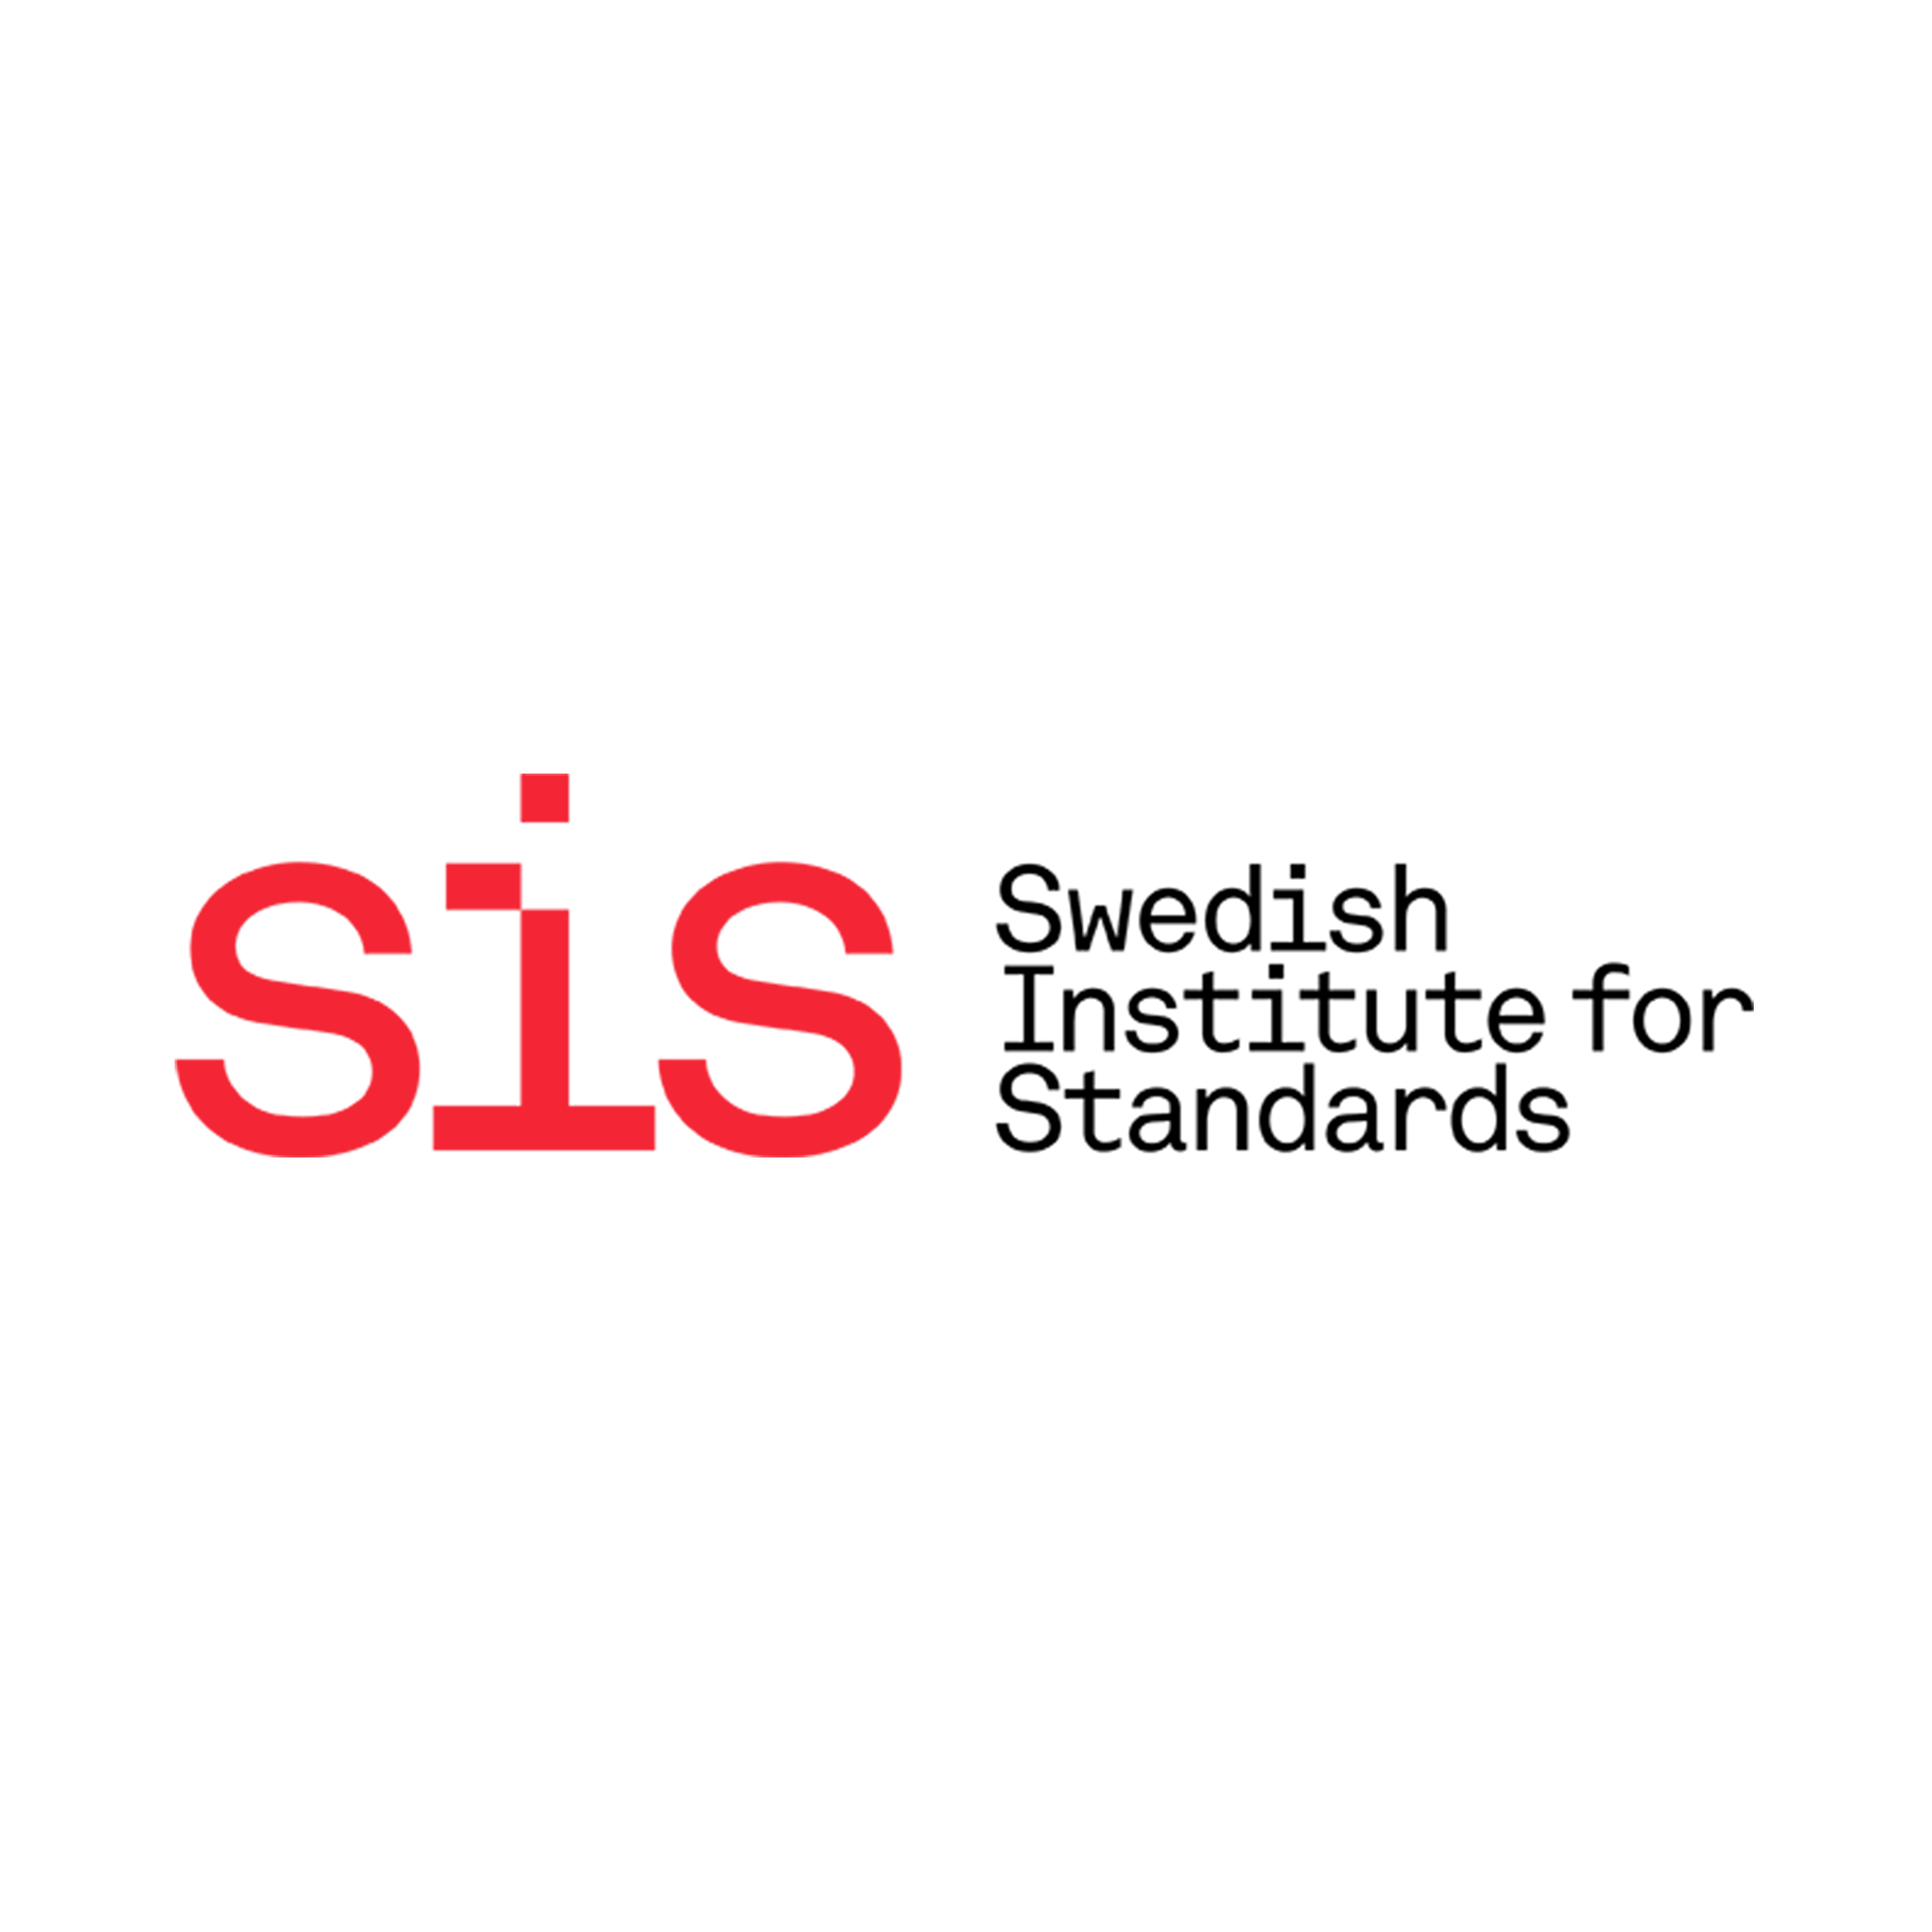 SIS logo in red and black